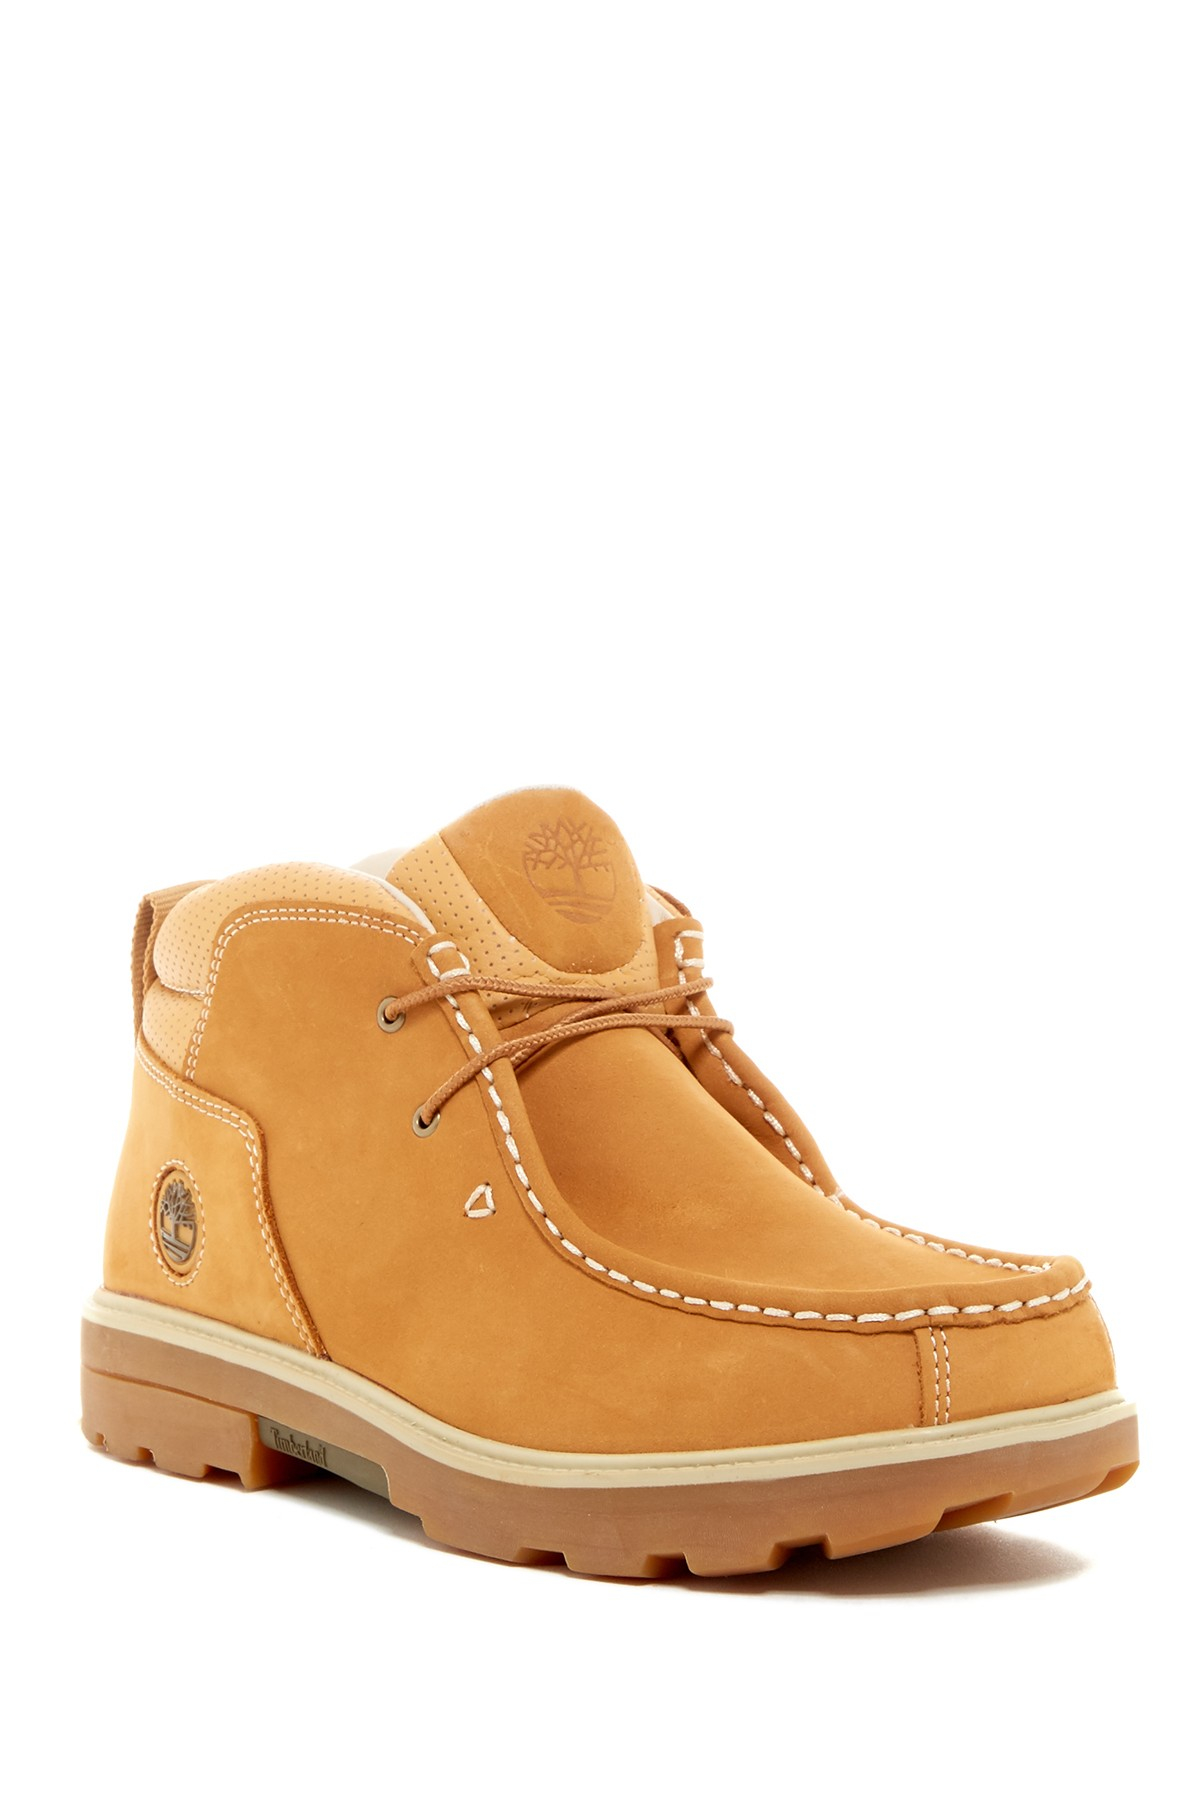 Timberland Leather Rugged Street 2 Chukka Boot in Yellow (Brown) - Lyst